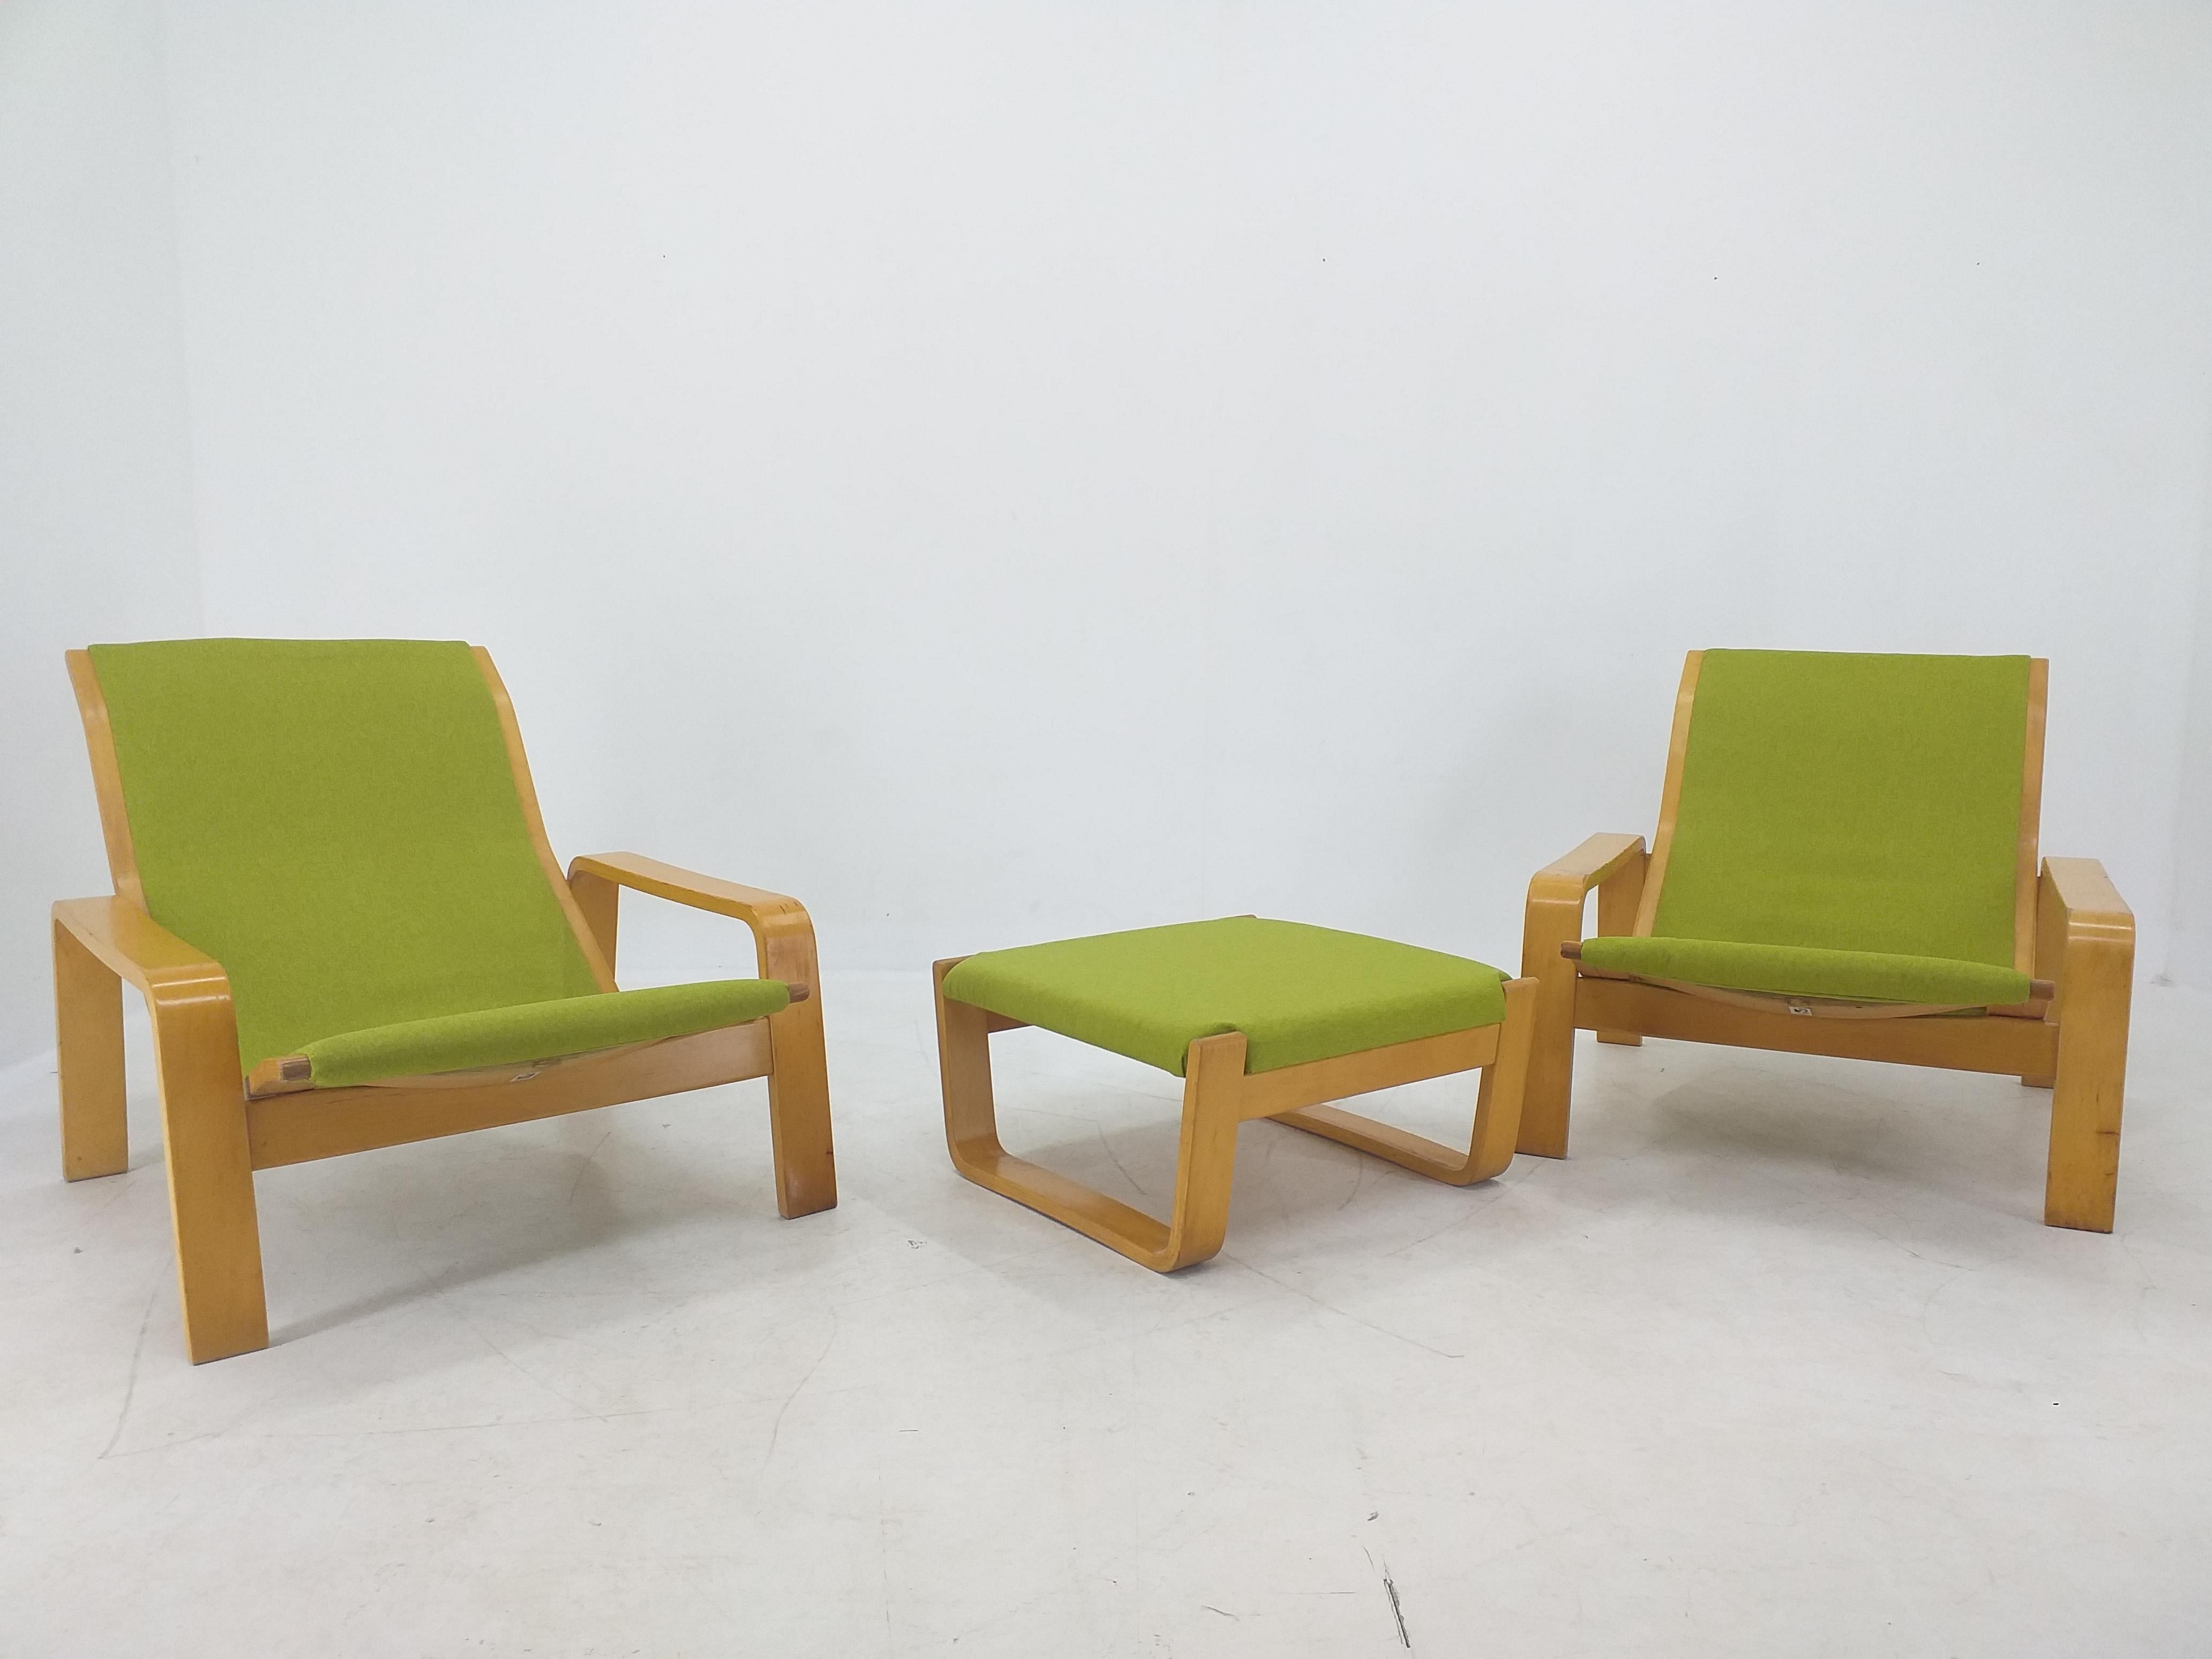 - Very confortable
- Two chairs and one footstool
- Marked by label
- Rare in set.